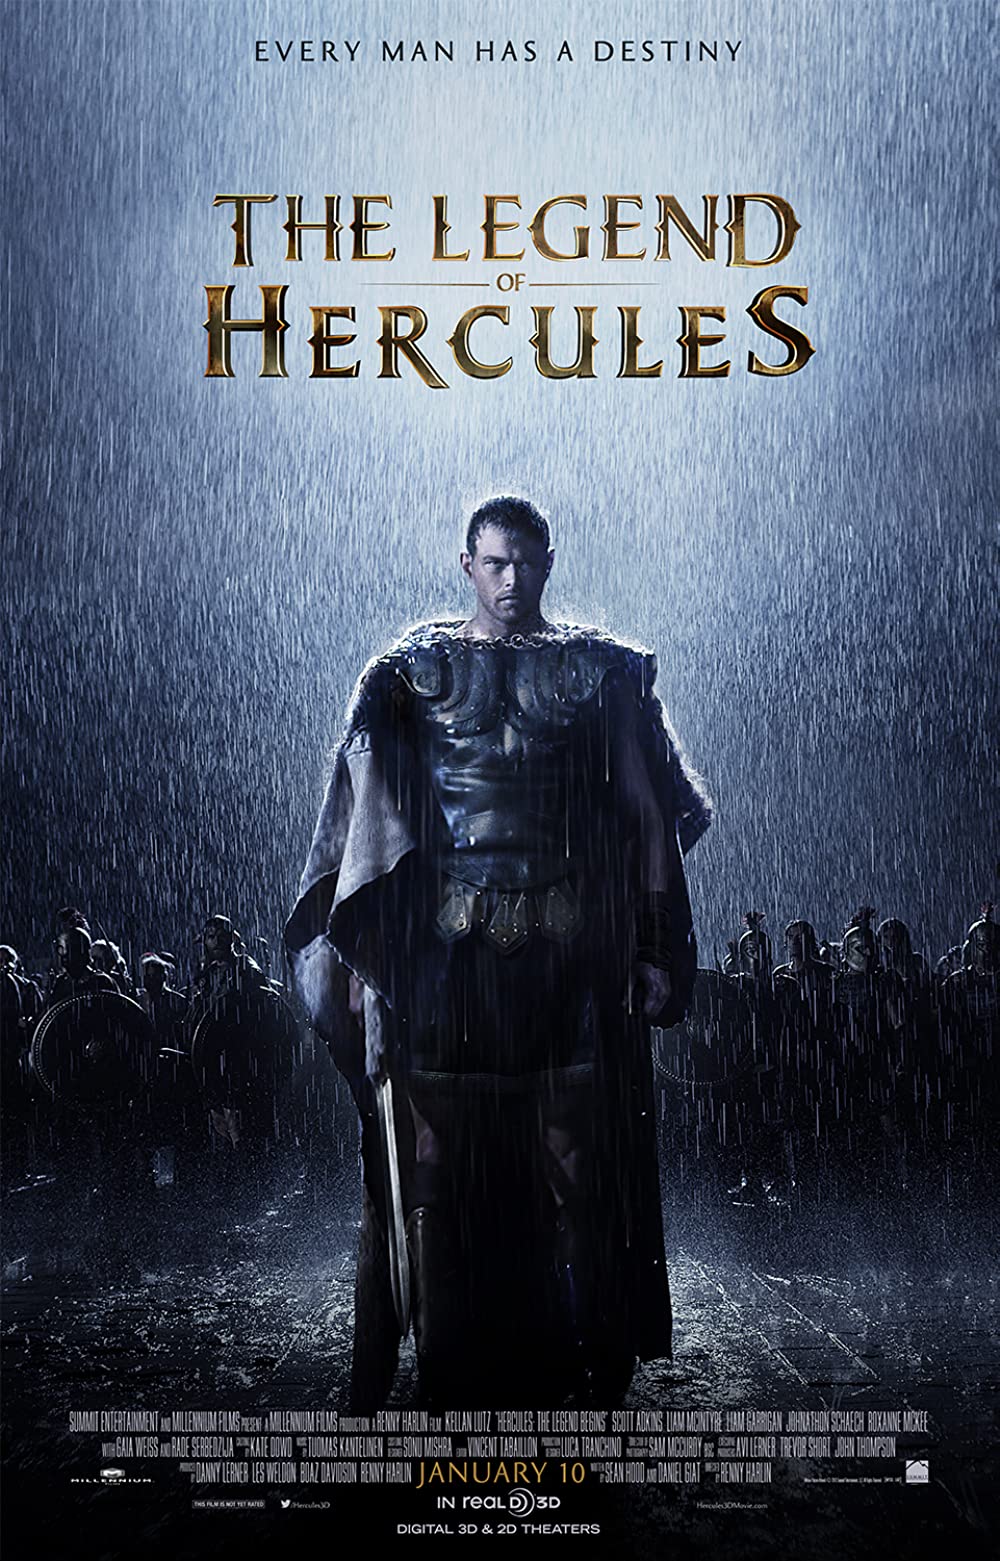 FULL MOVIE: The Legend Of Hercules (2014) [Action]